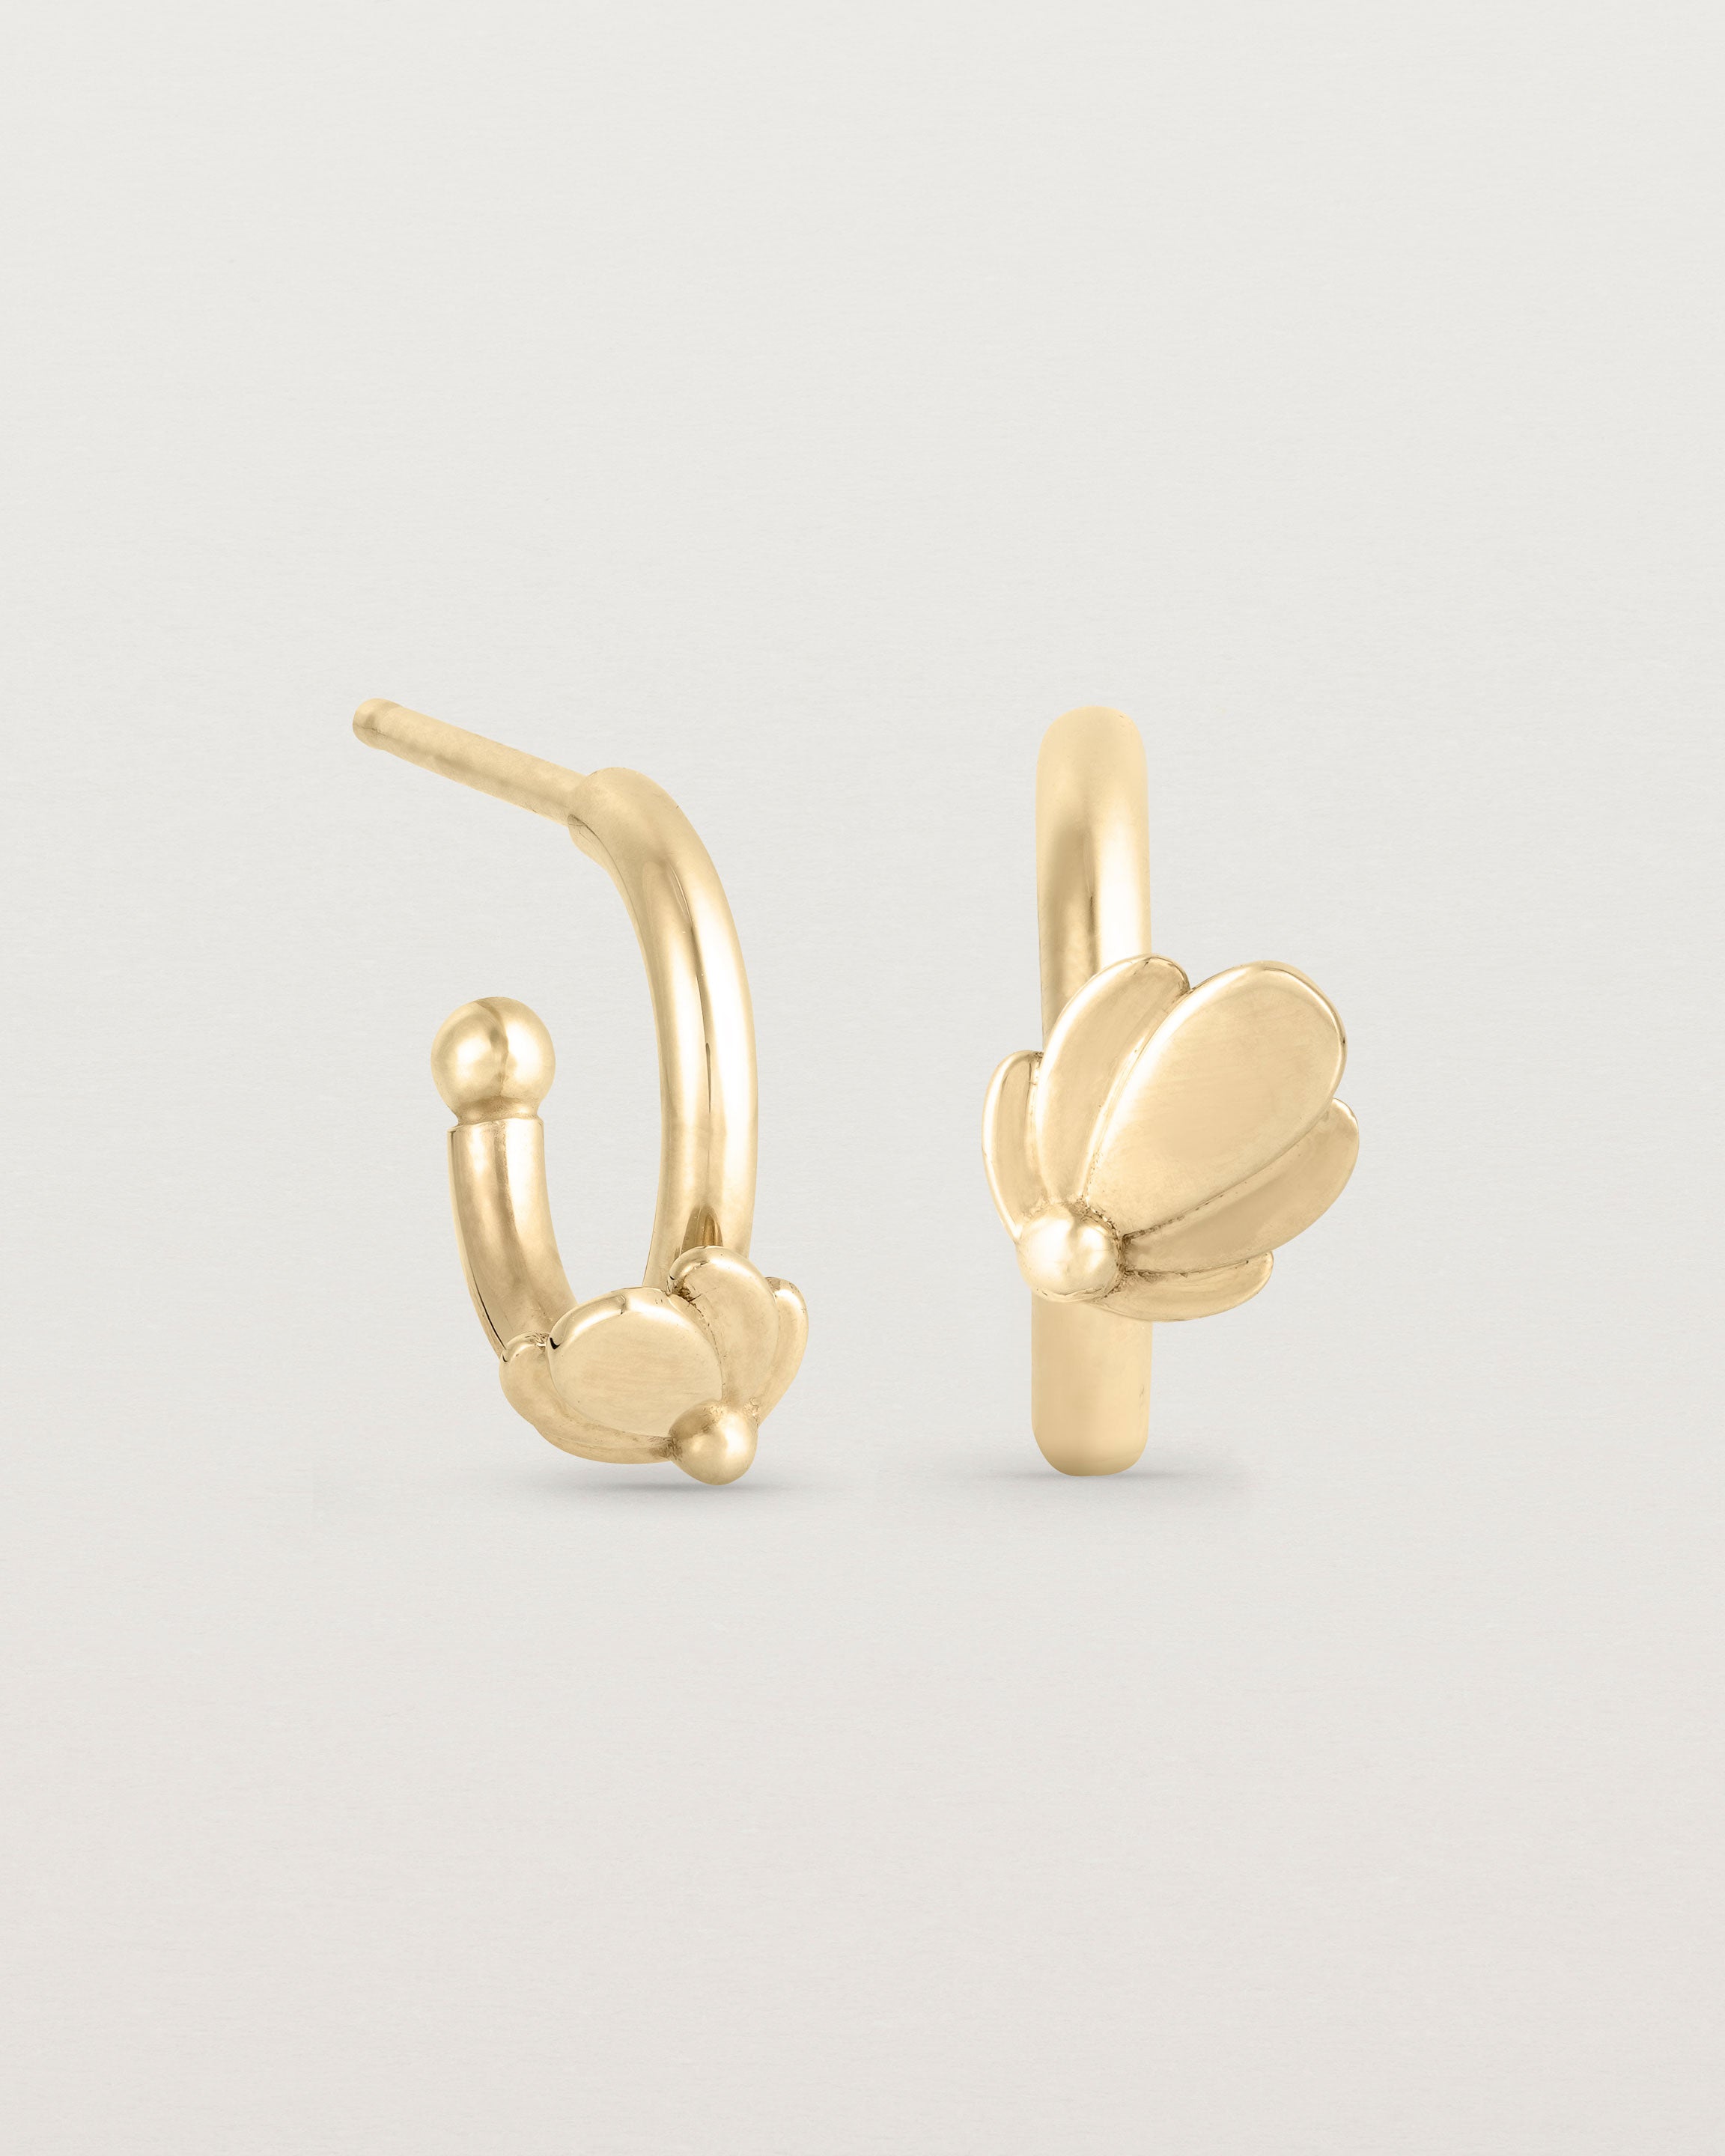 A pair of Aeris Hoops in yellow gold.